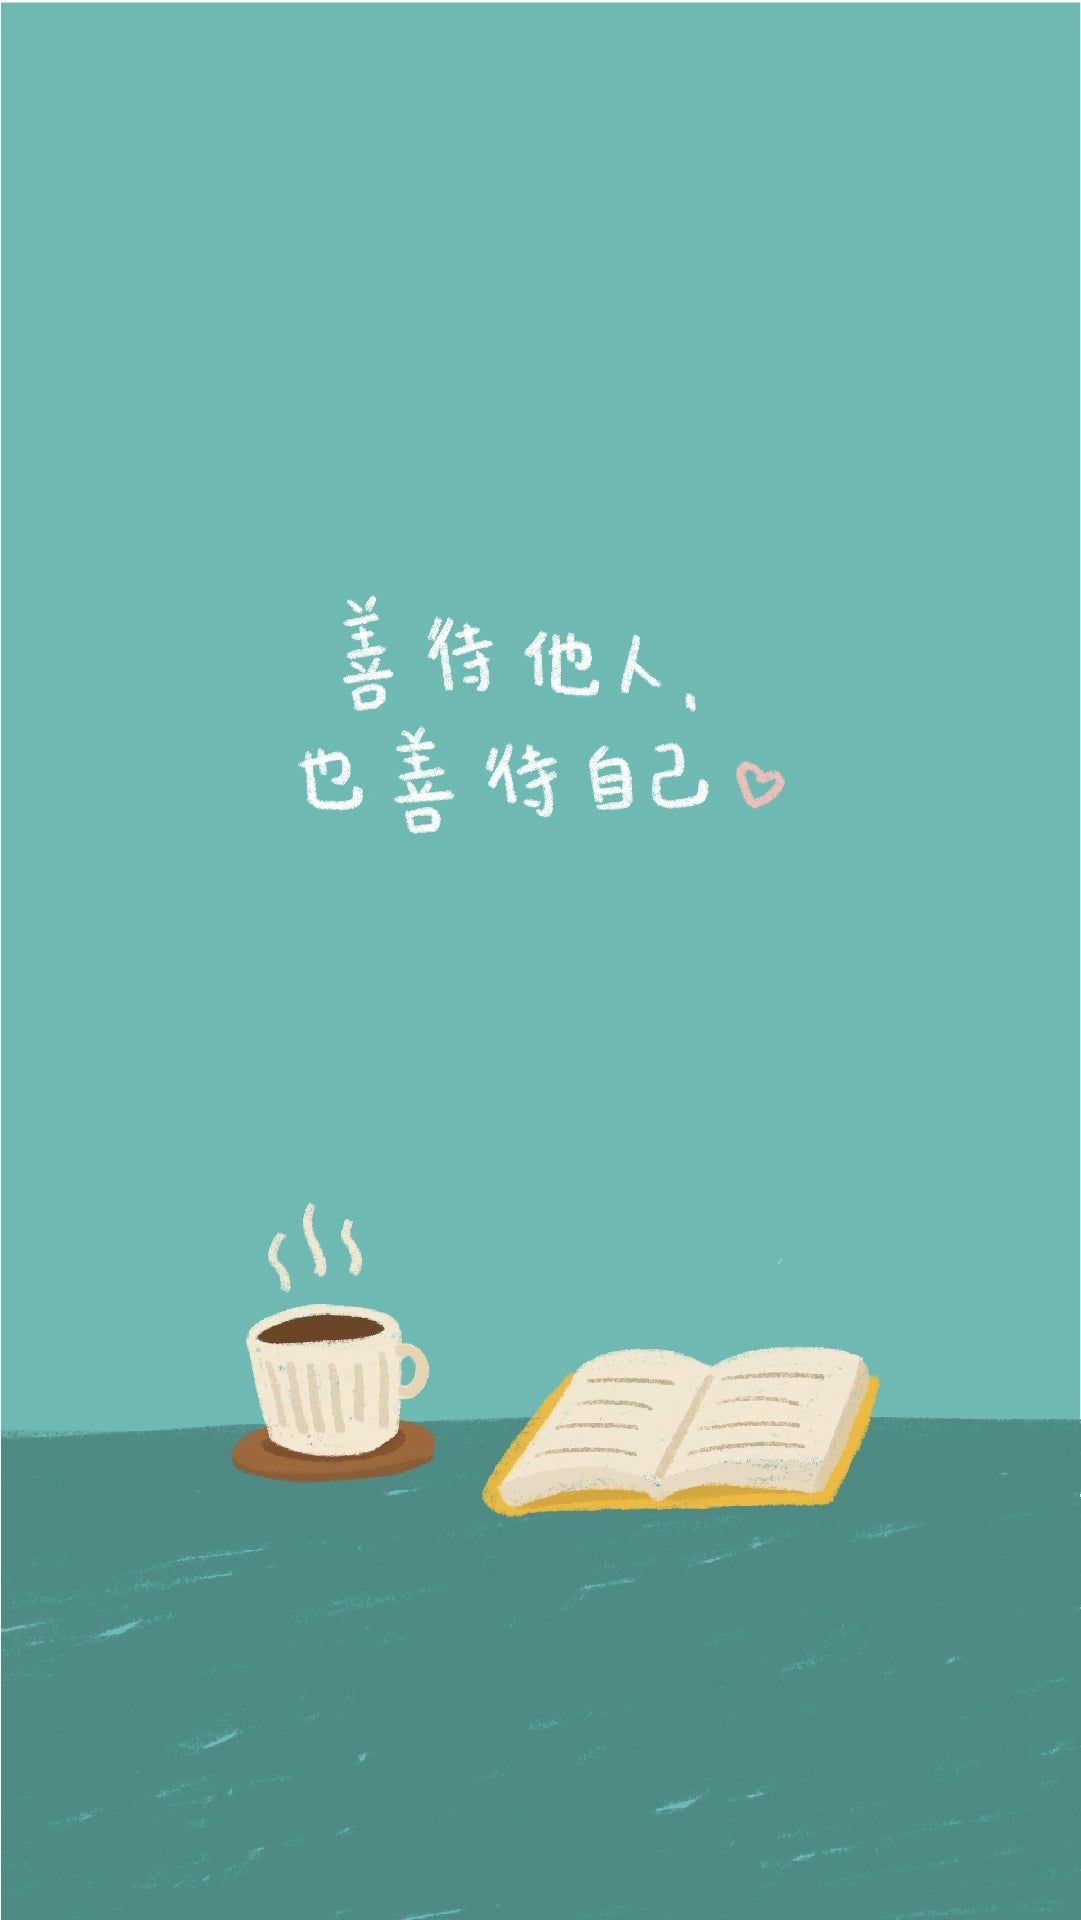 phone wallpaper of a digital illustration of a chinese quote about loving yourself and others